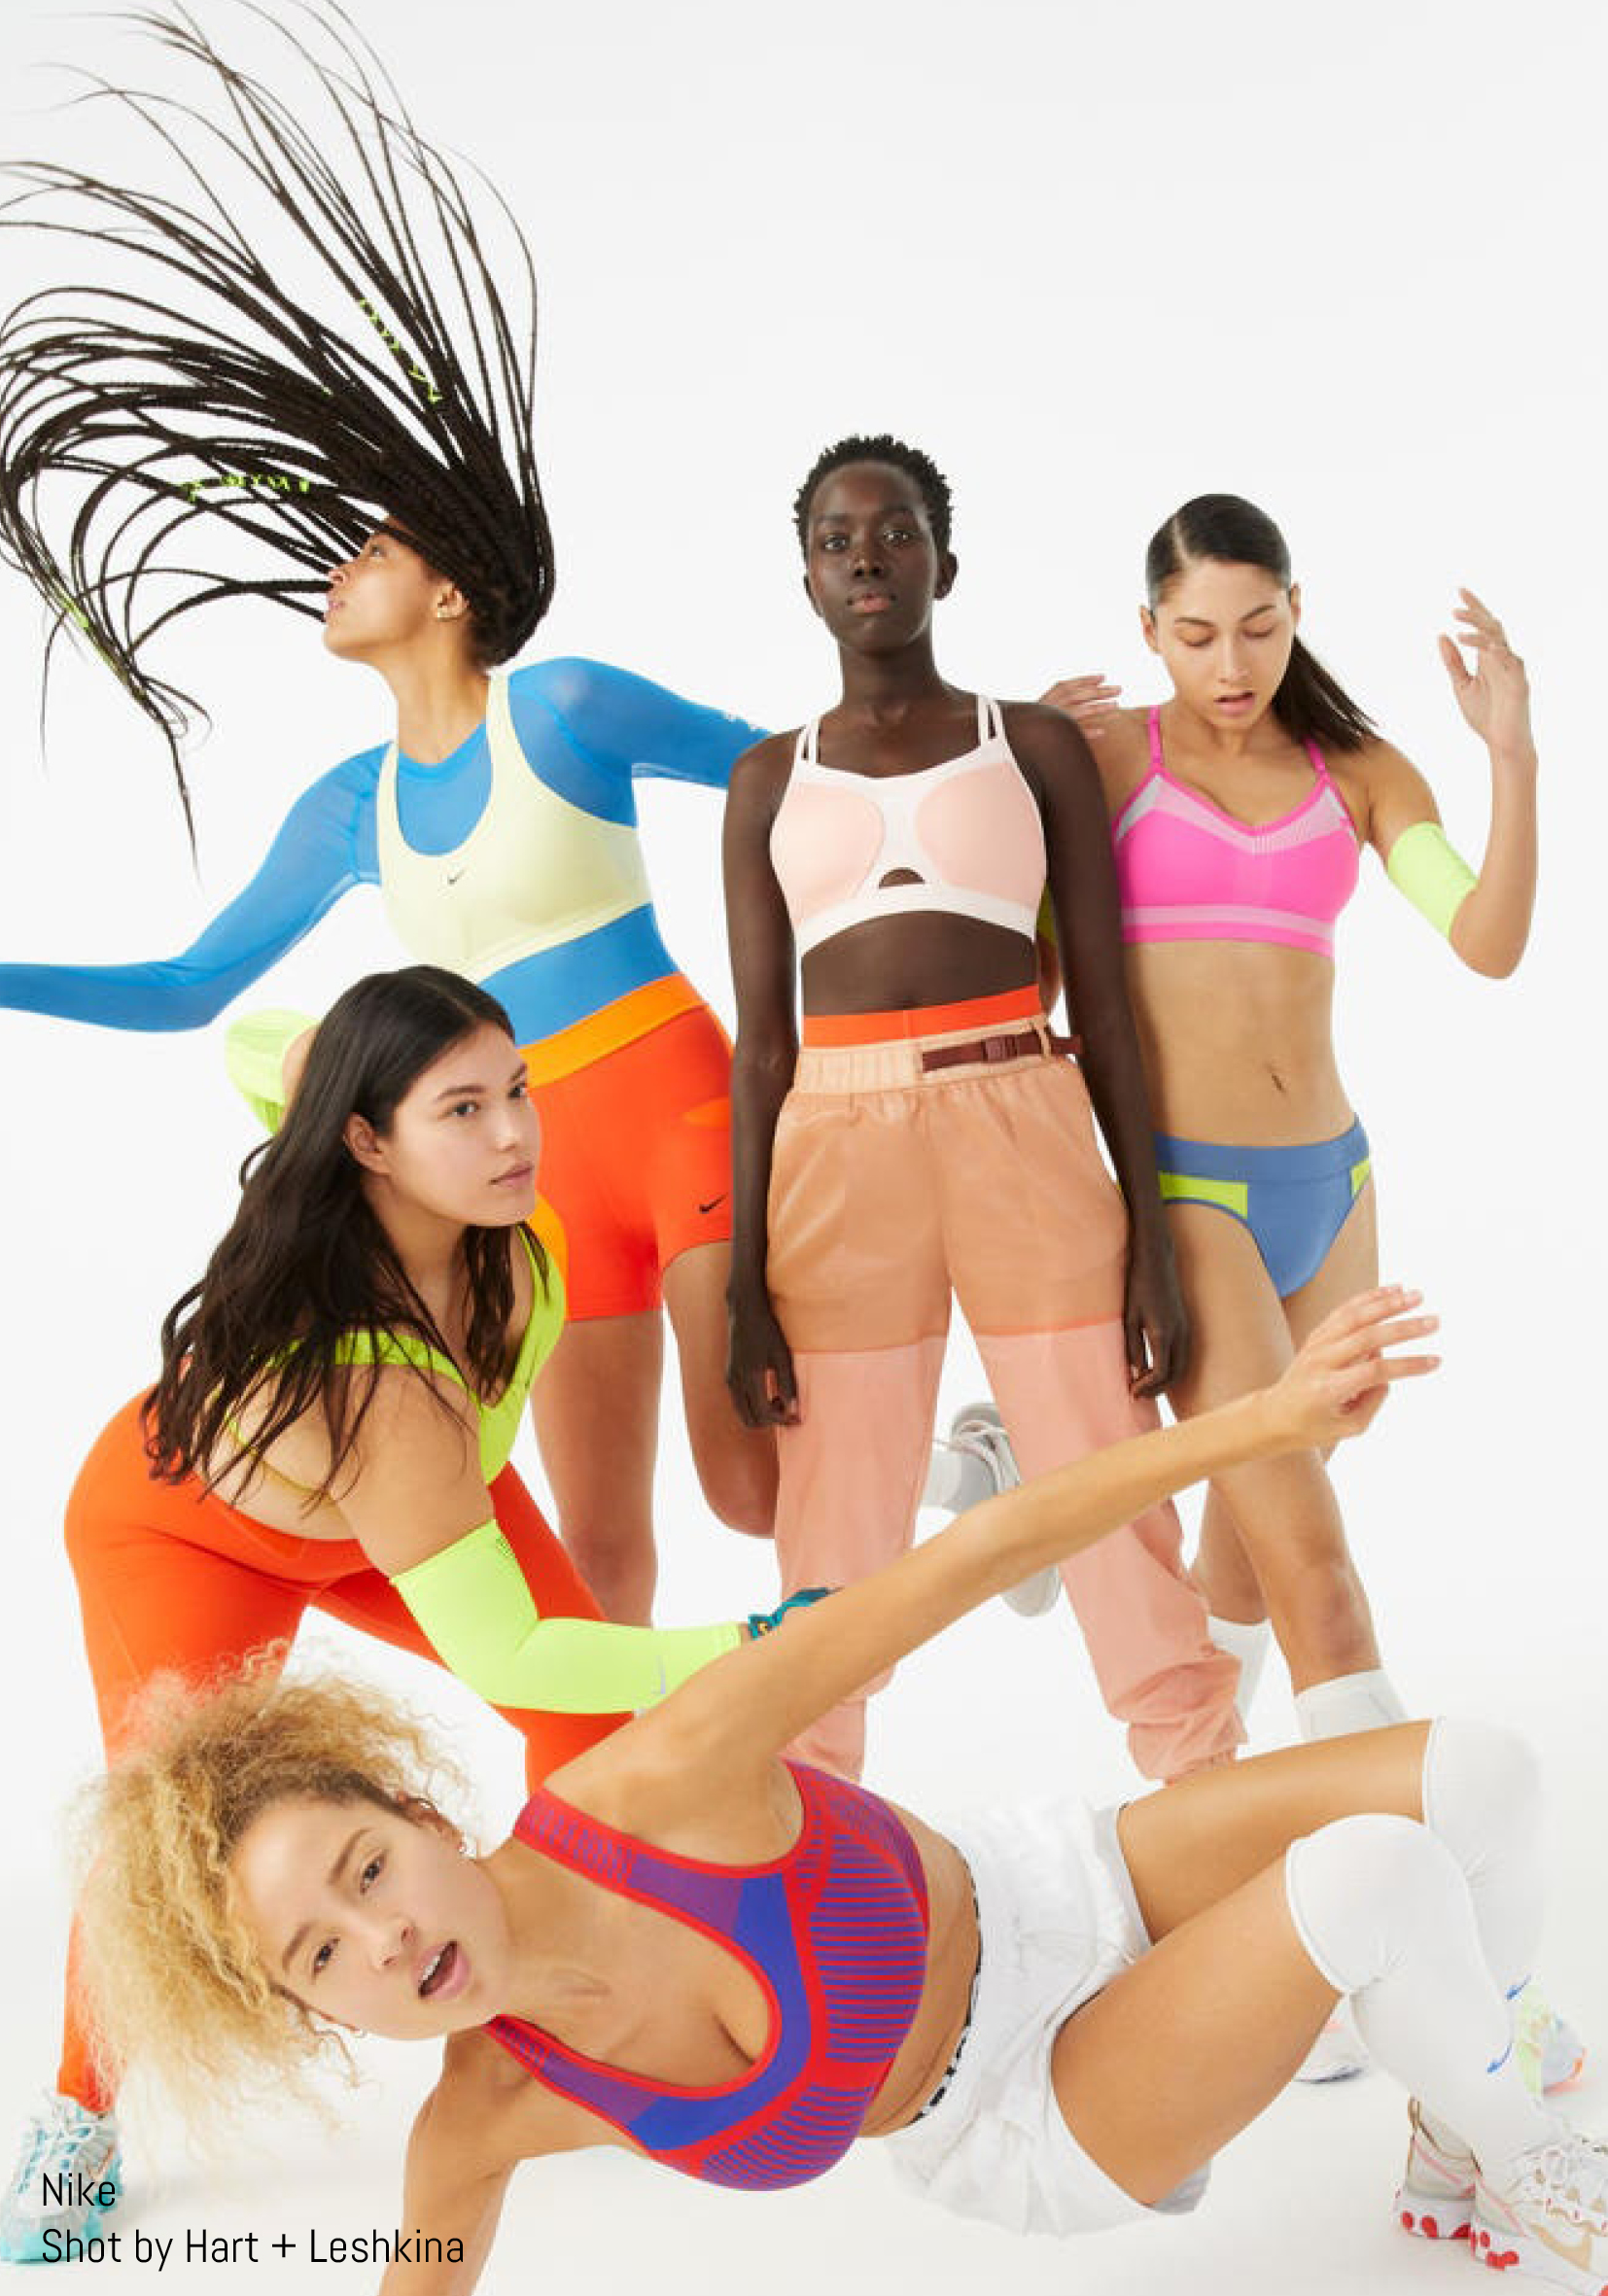 What explains athleisure wear's success in the fashion industry?